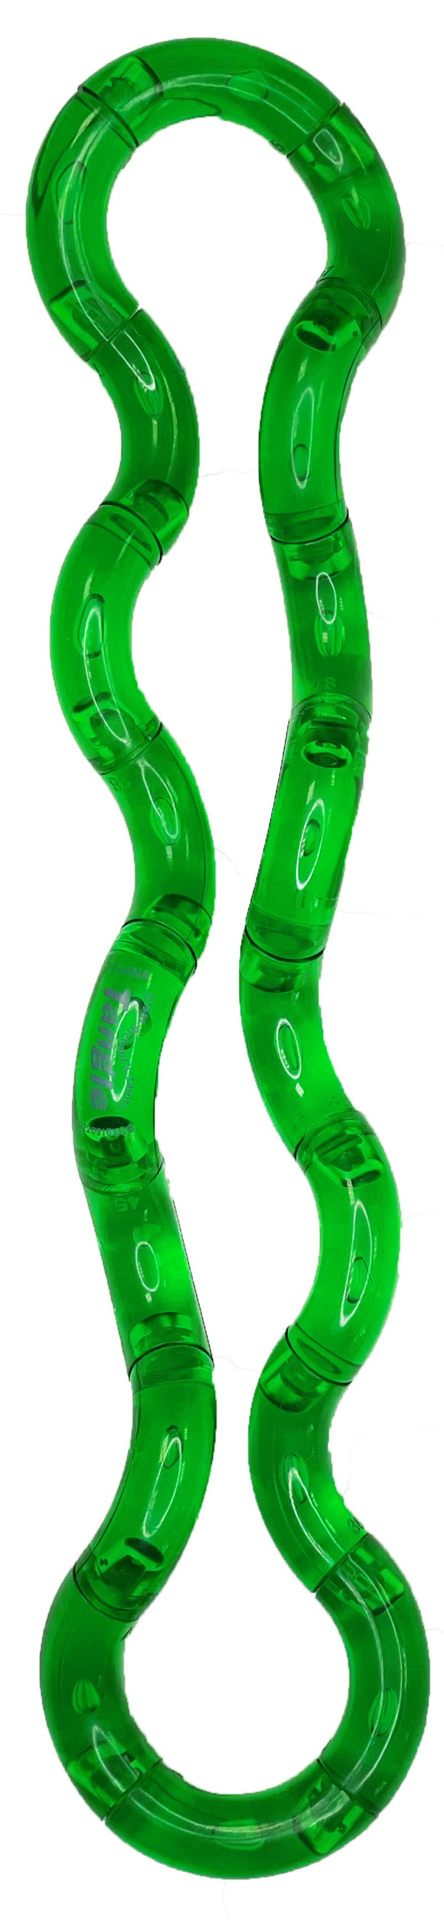 Translucent Green Tangle laid out